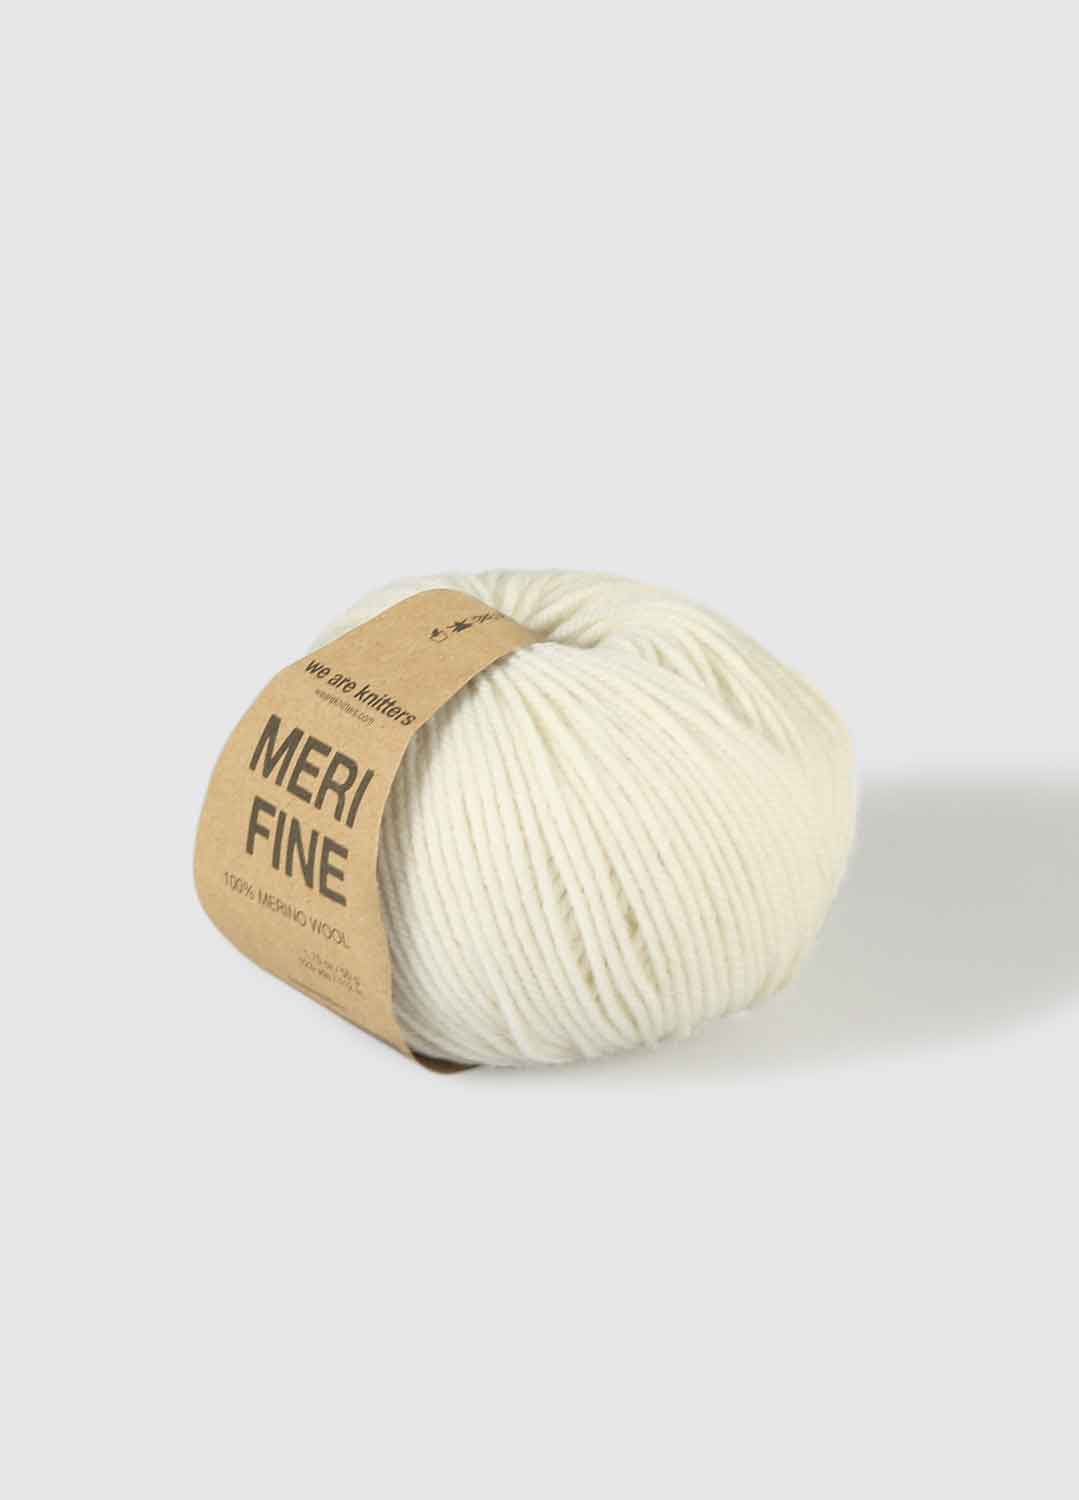 Merifine Natural – We are knitters